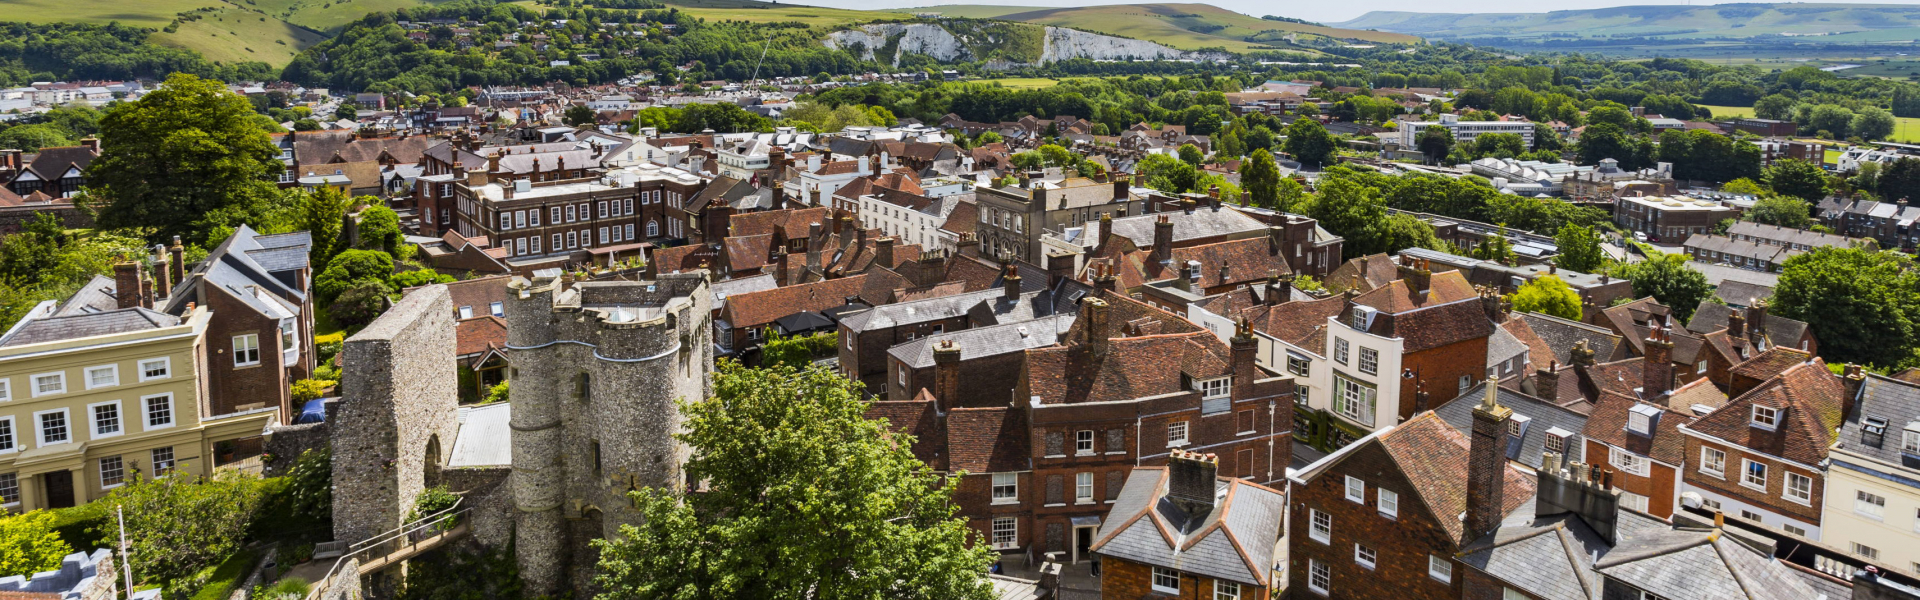 Lewes - home of East Sussex County Hall